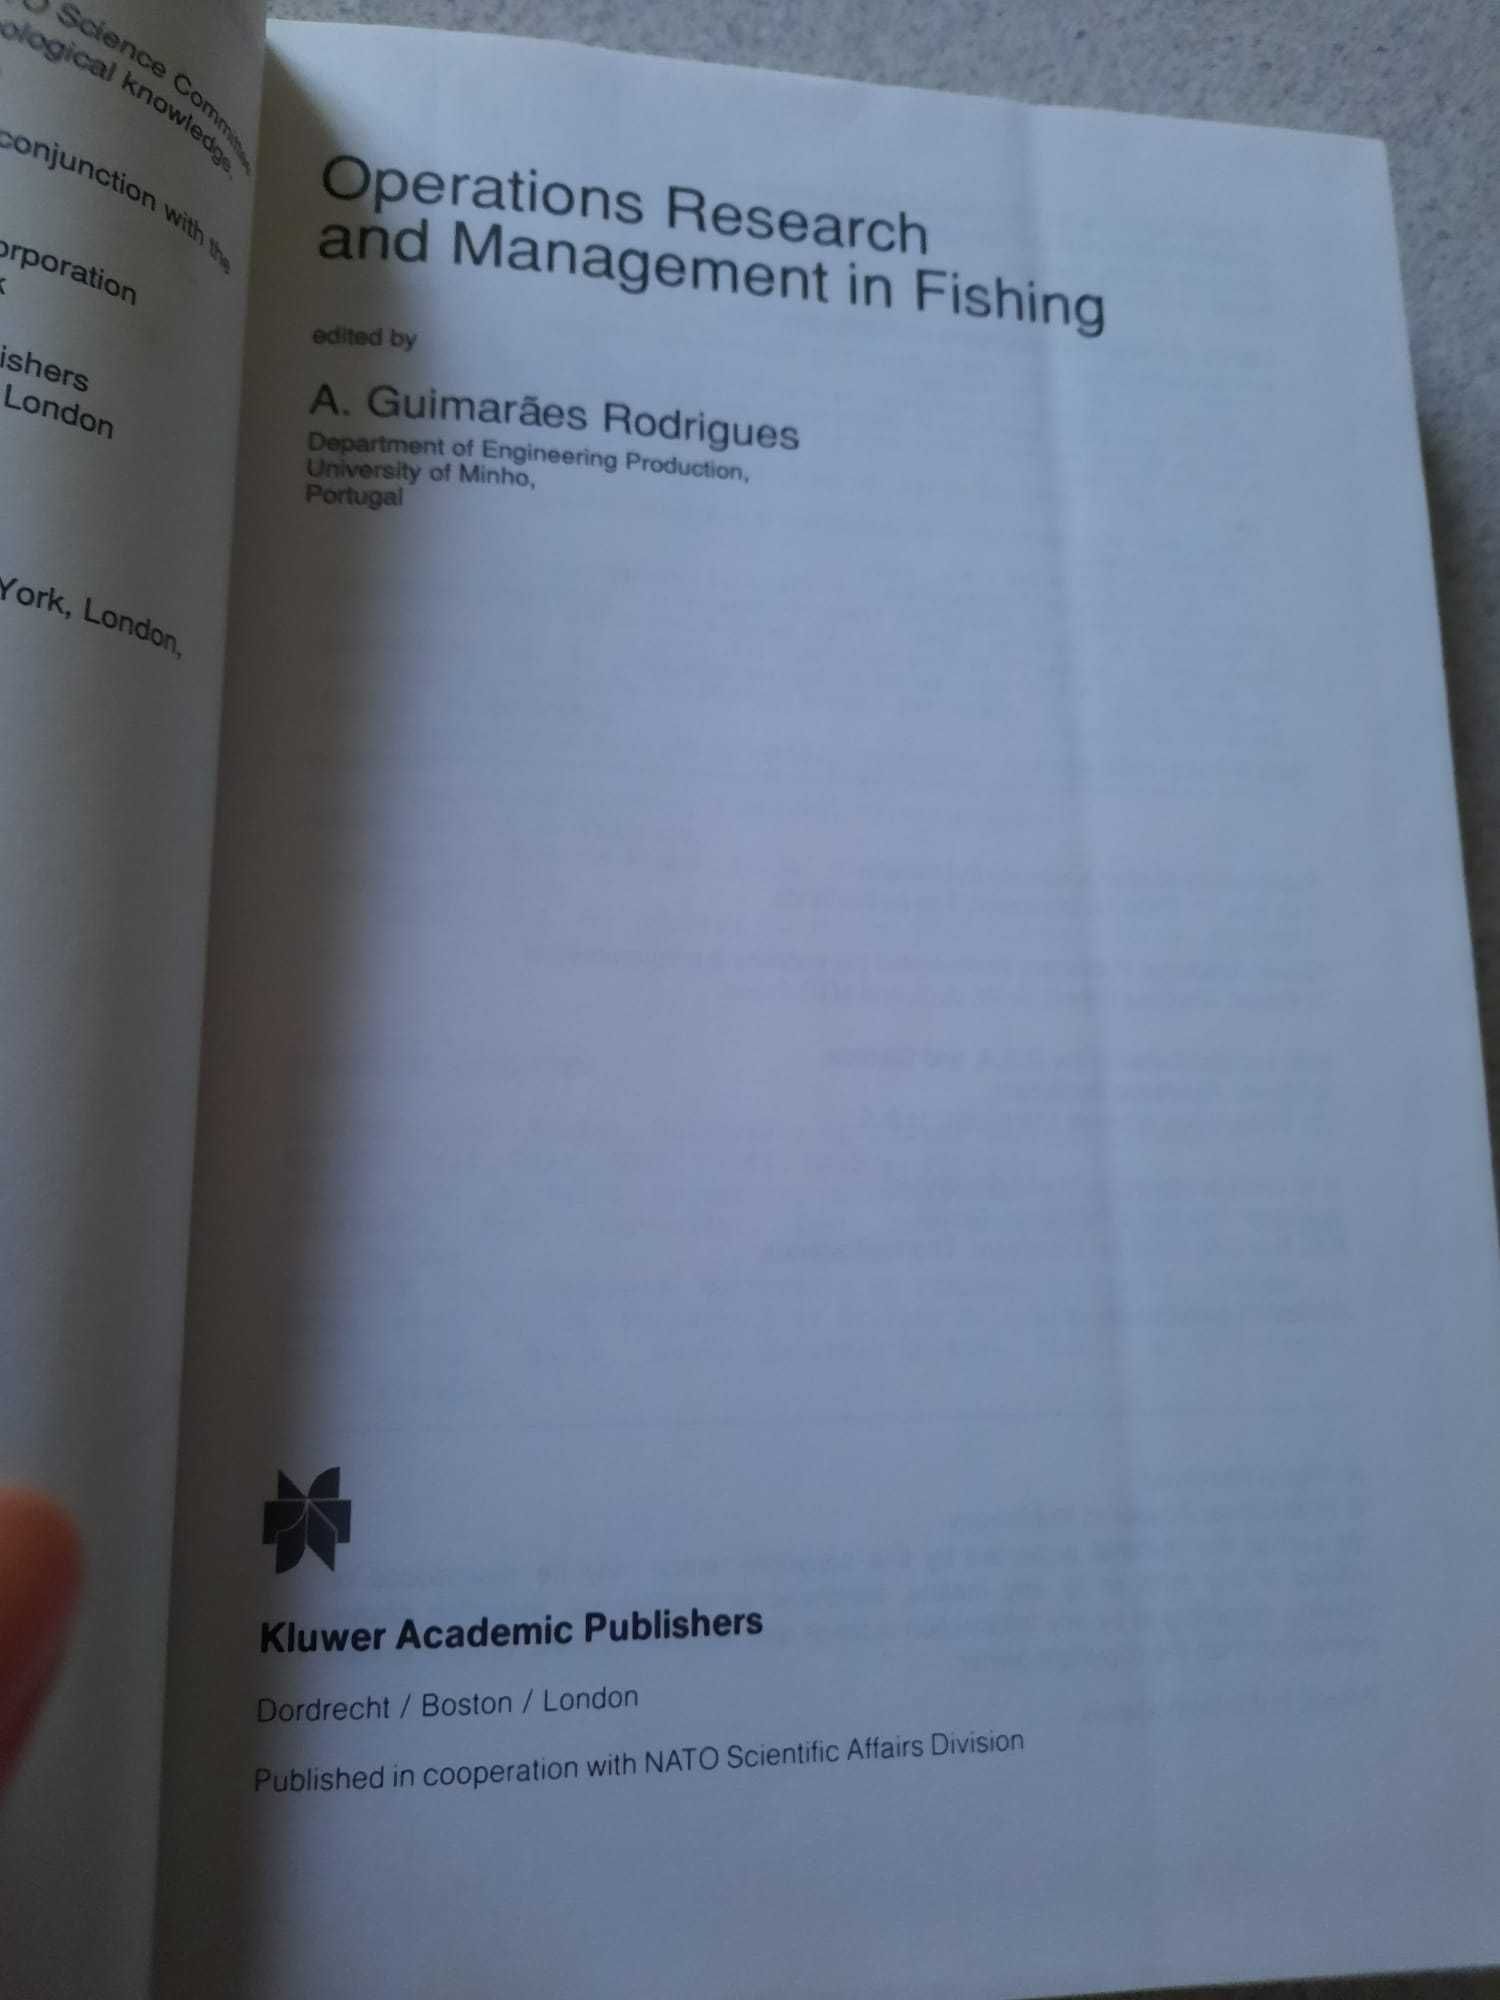 Operations Research and Management in Fishing (portes grátis)